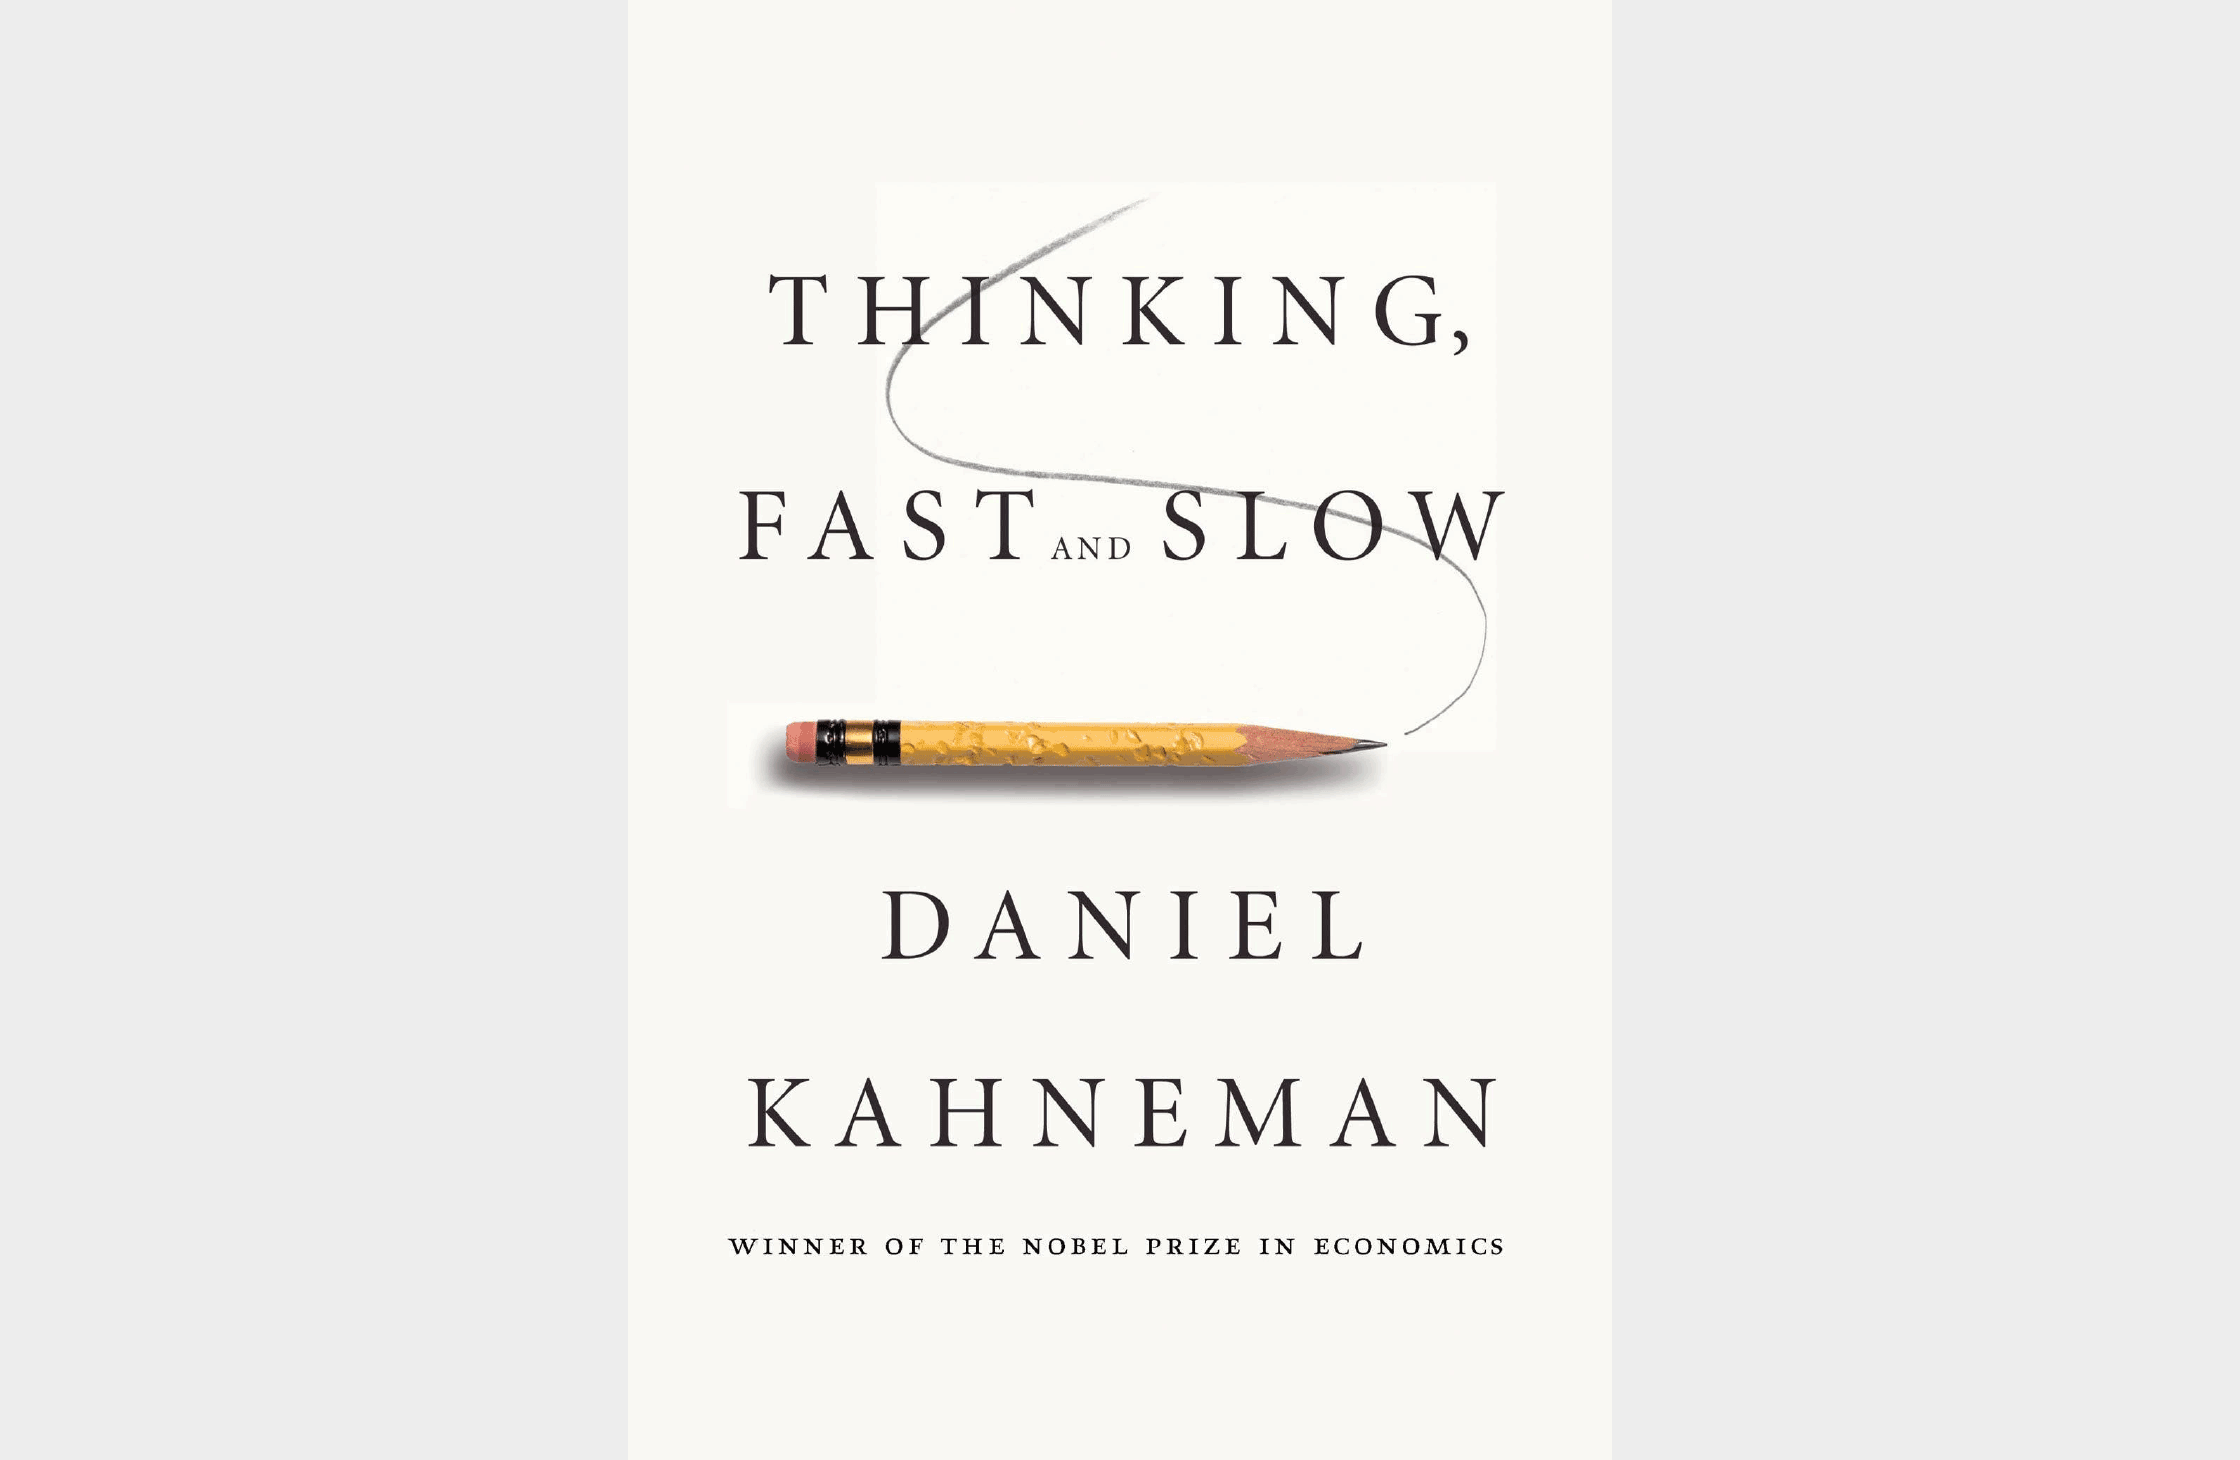 Summary: "Thinking, Fast and Slow" by Daniel Kahneman